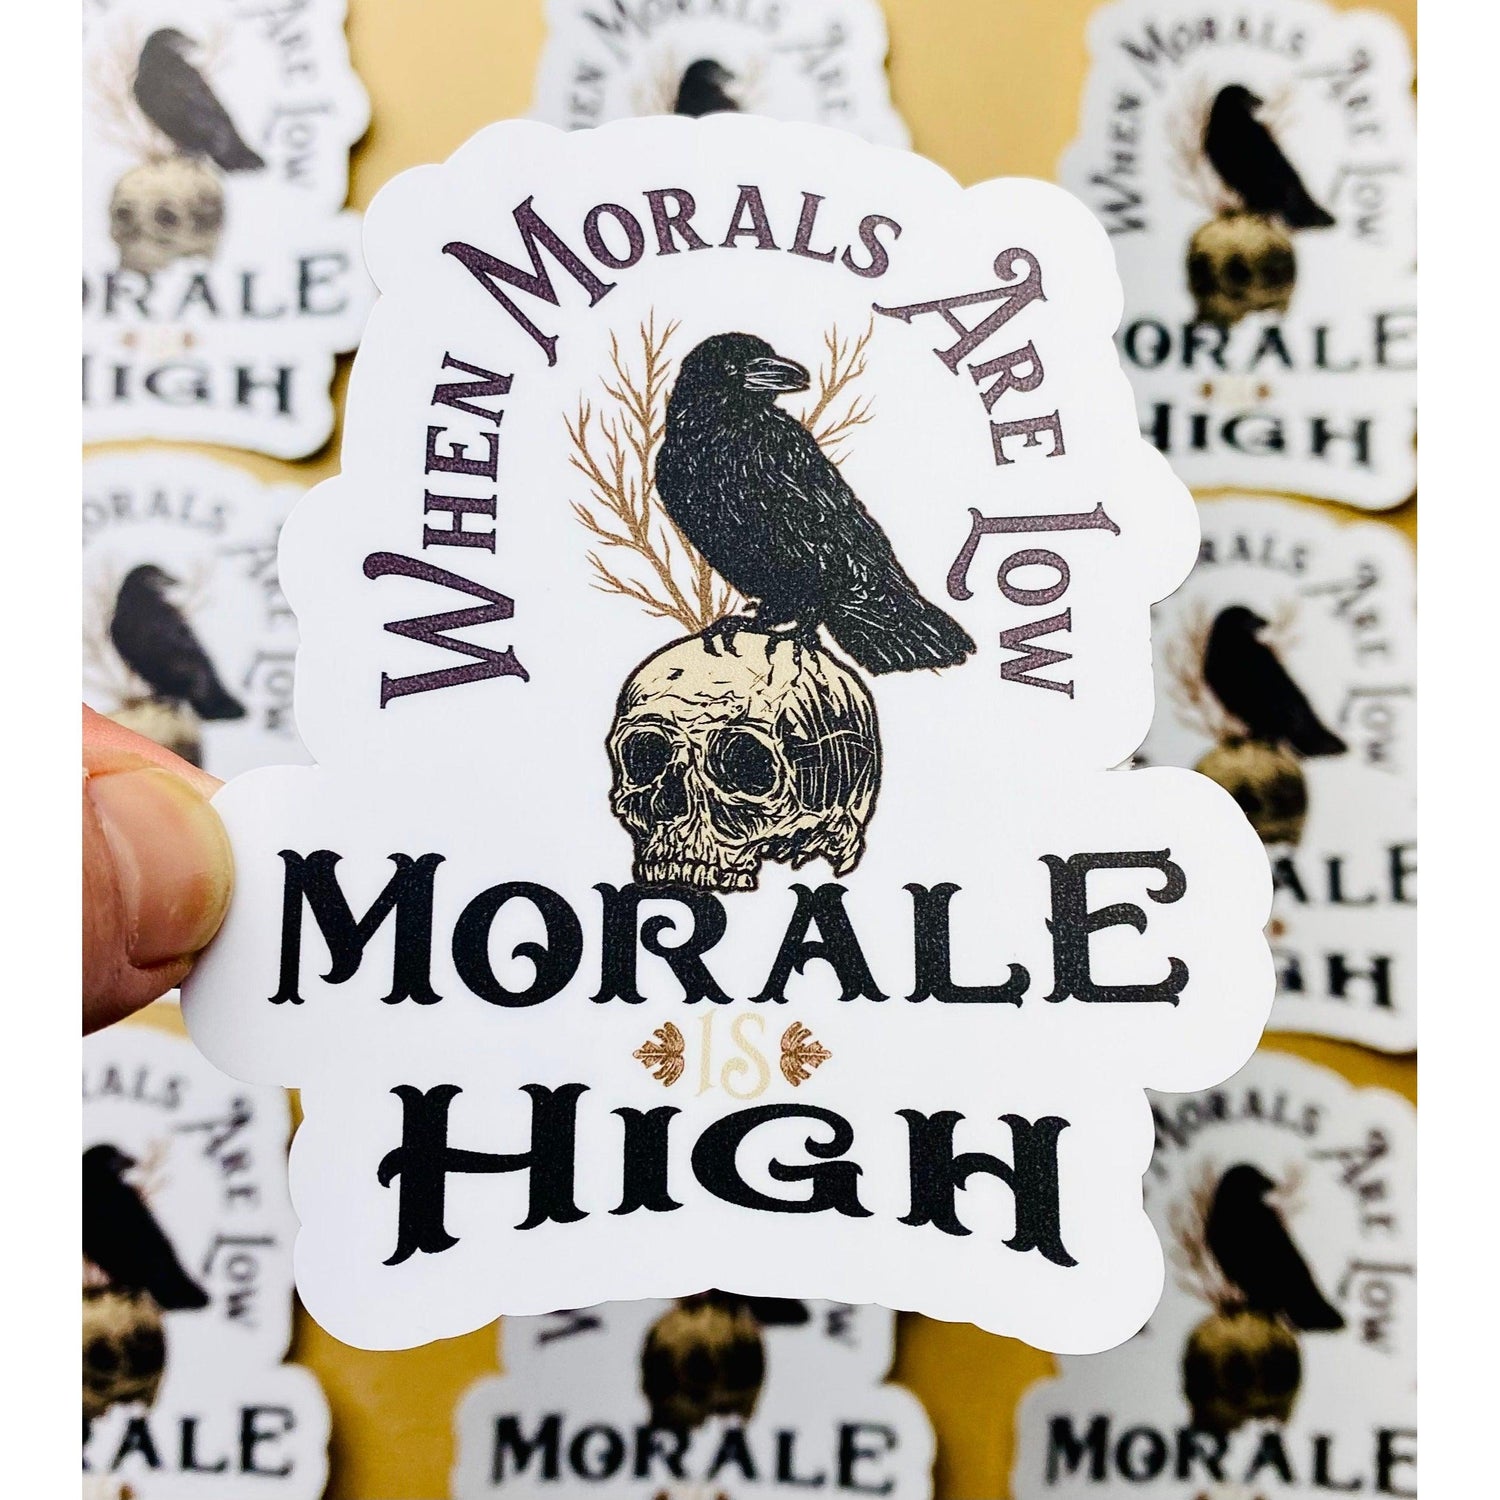 Morals Are Low, Morale is High Sticker for Police K9 Handler, Military K9, Army, K9 Unit, Law Enforcement - Ottos Grotto :: Stickers For Your Stuff